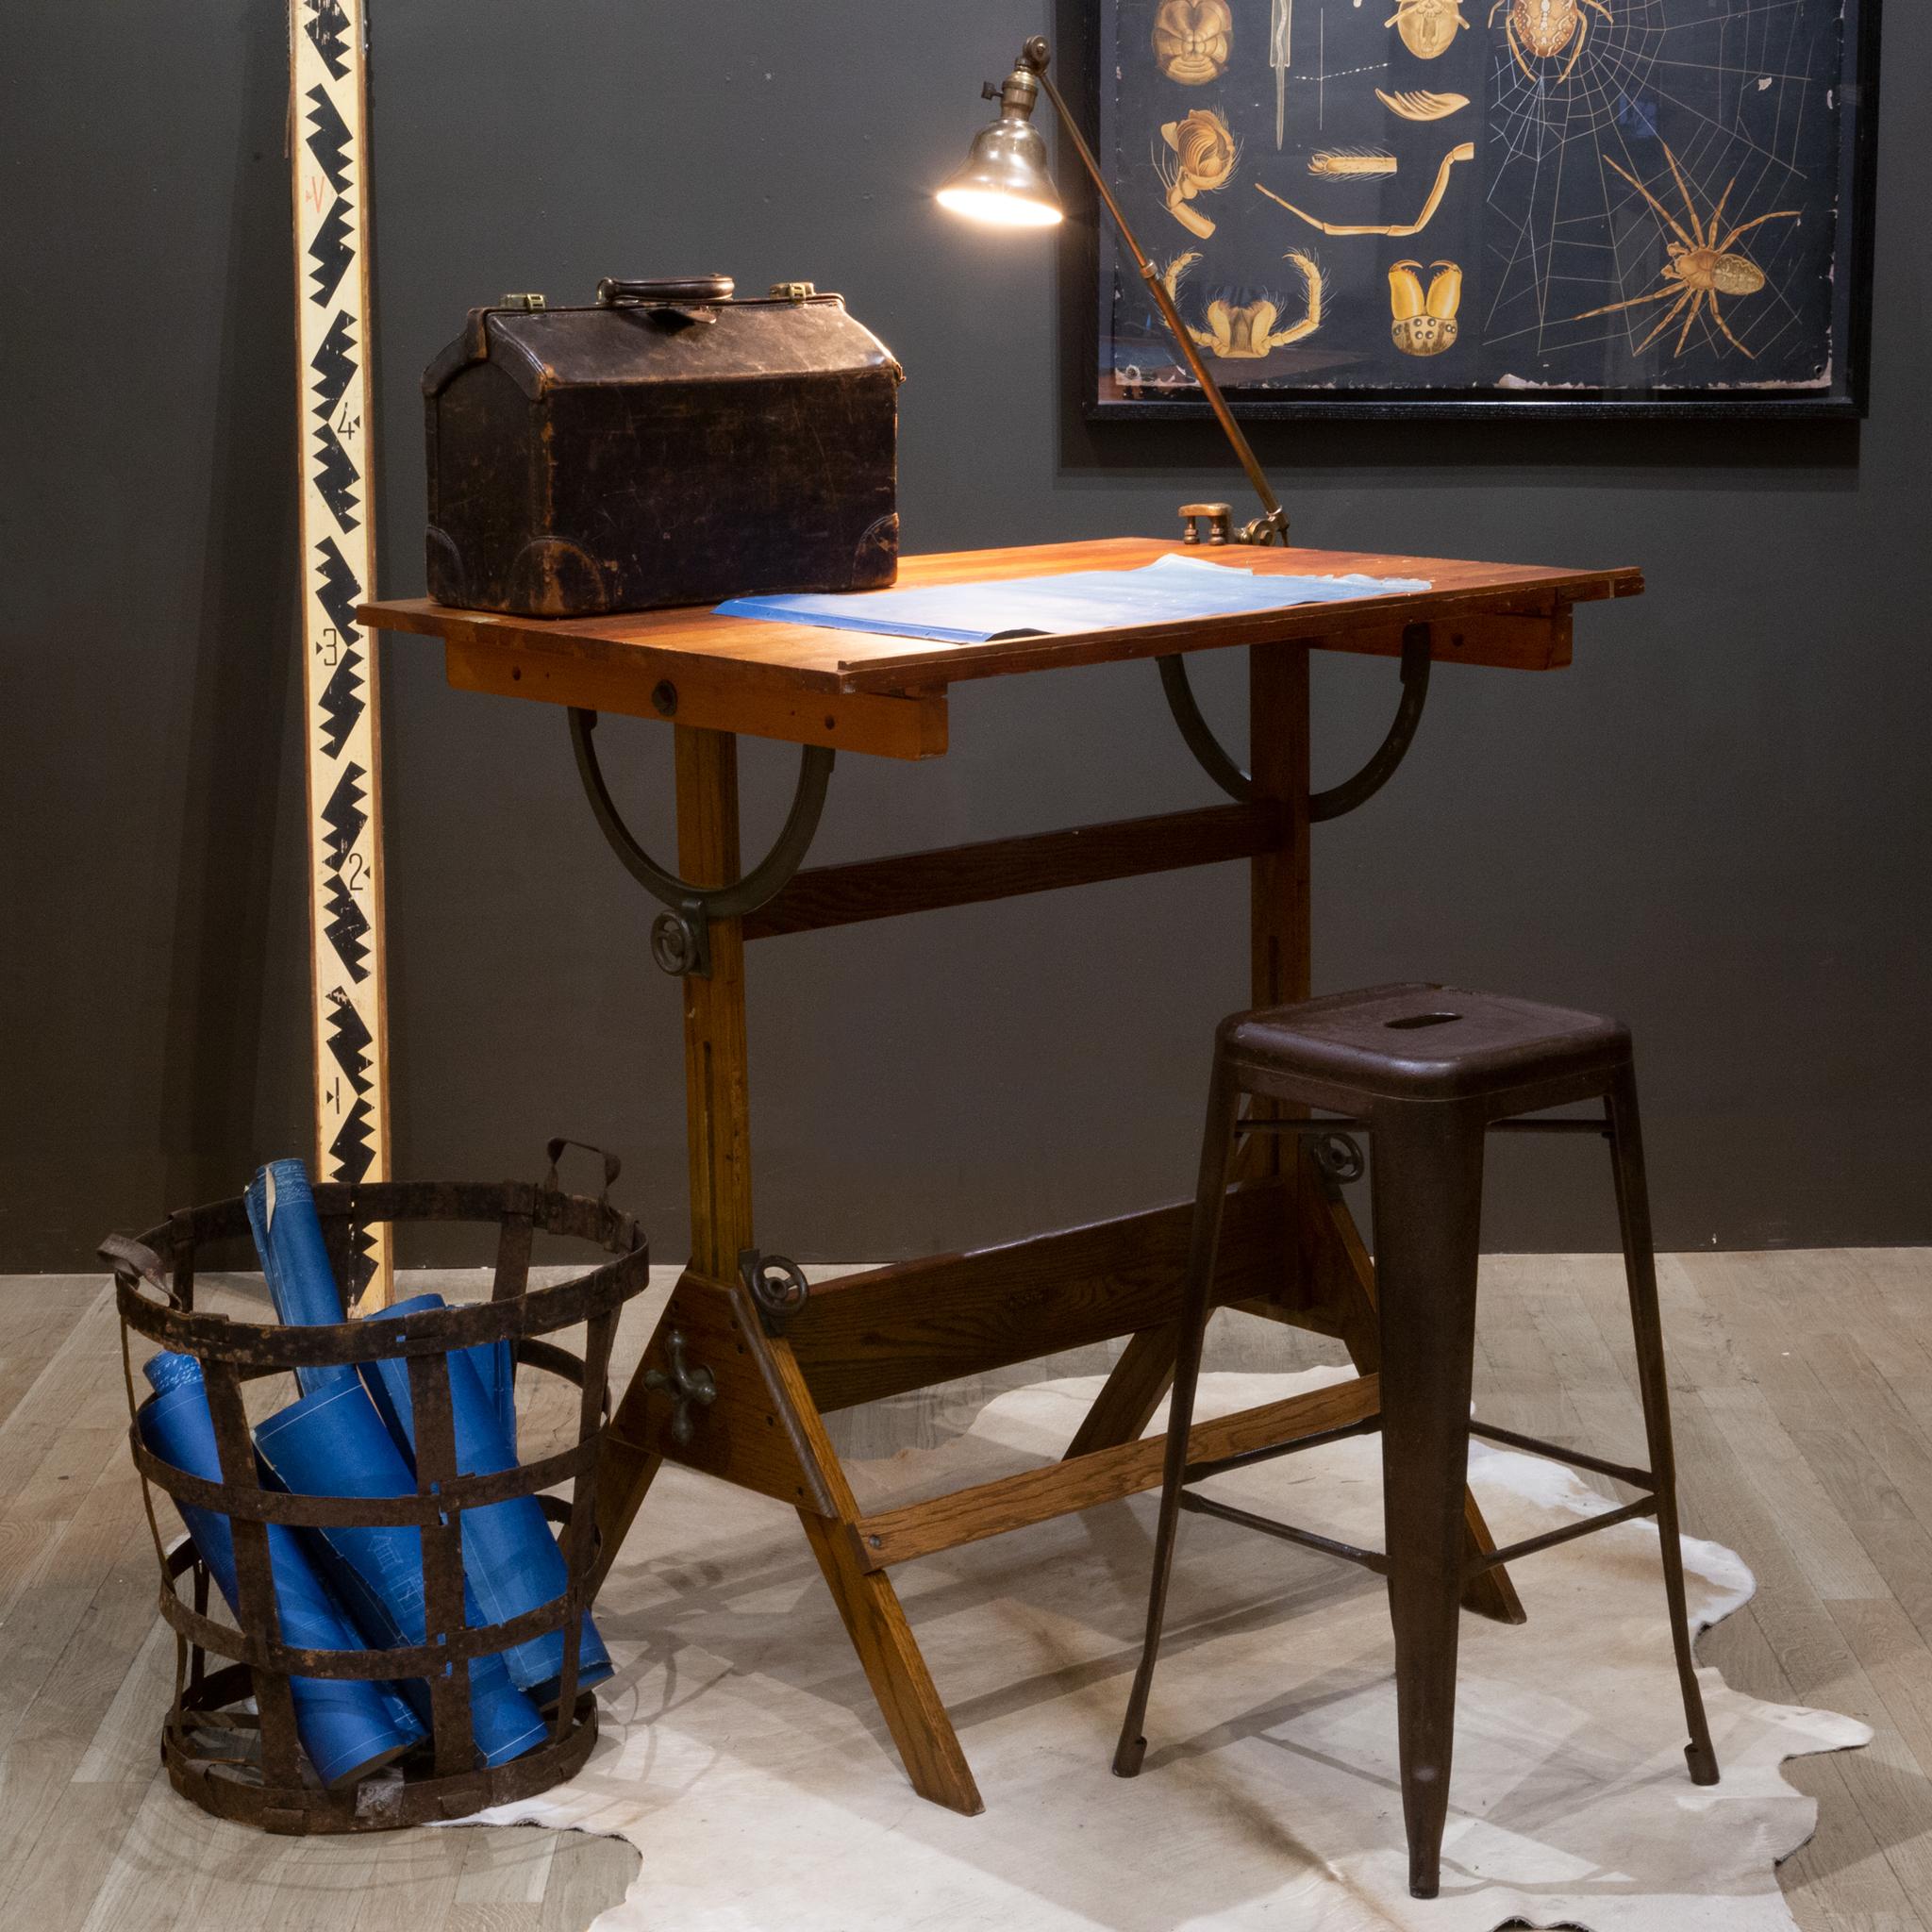 About

A fully adjustable industrial wooden drafting table with steel and cast iron knobs and brackets. The table can be used as a tall dining table, desk or drafting table. The top swivels at any angle and from either side. The whole table can be